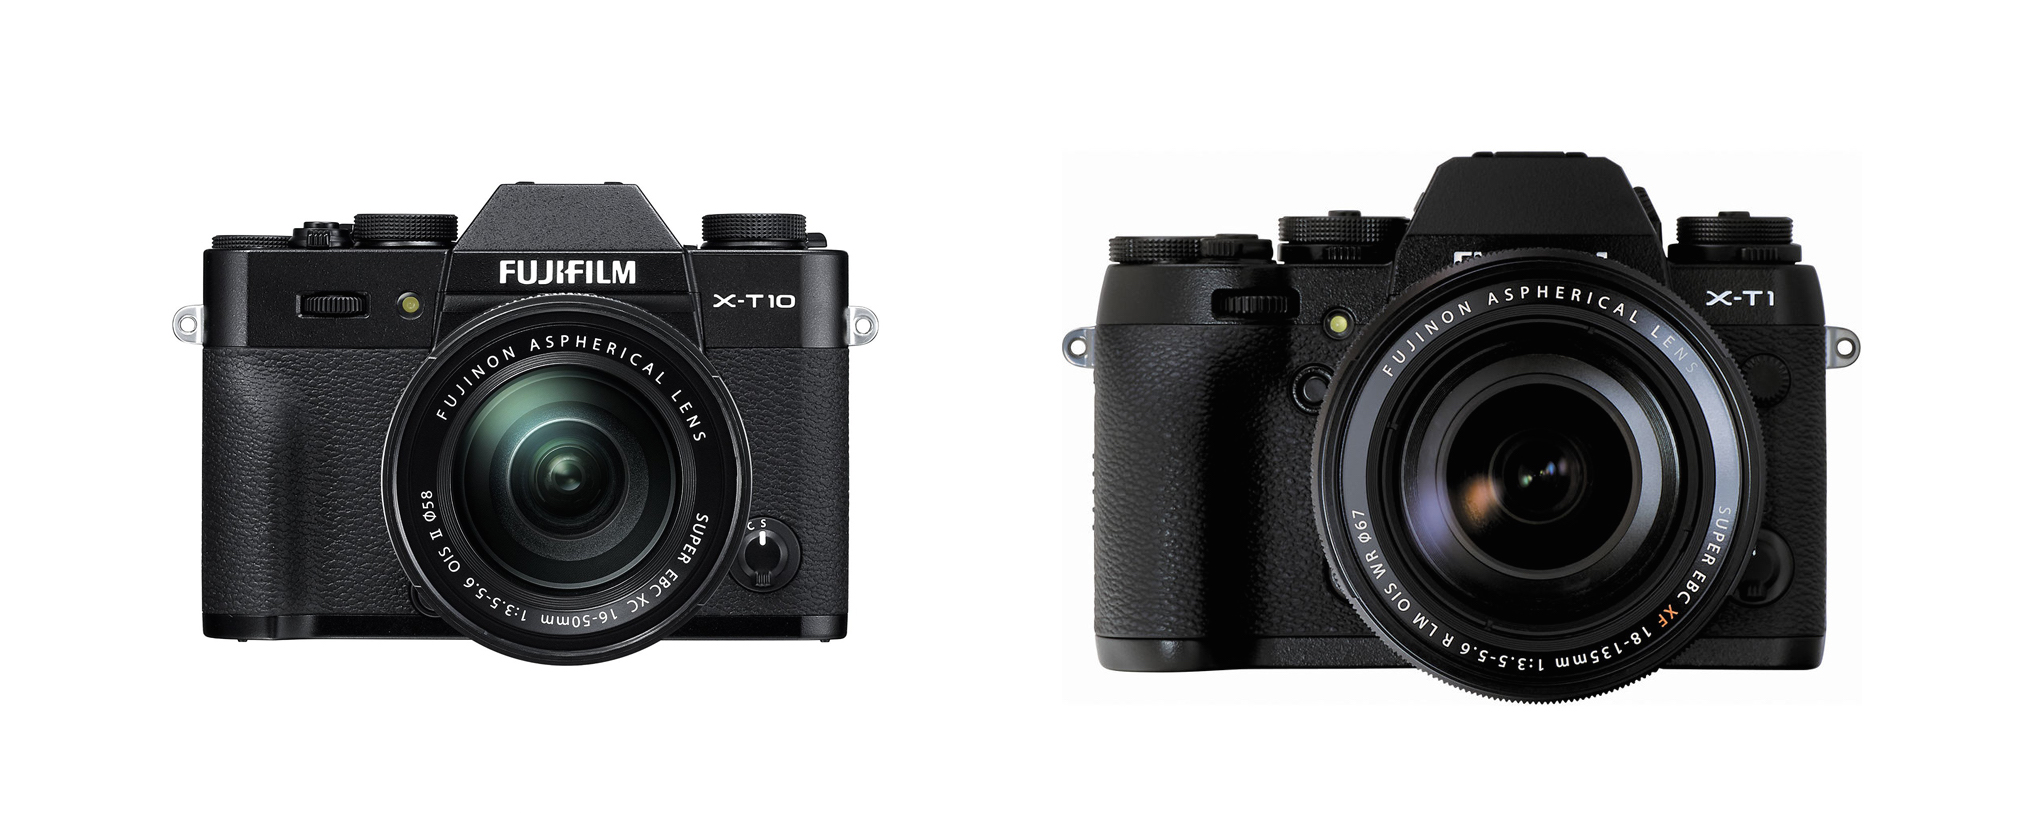 fujifilm-released-x-t1-firmware-v4-3-and-x-t10-firmware-v1-20